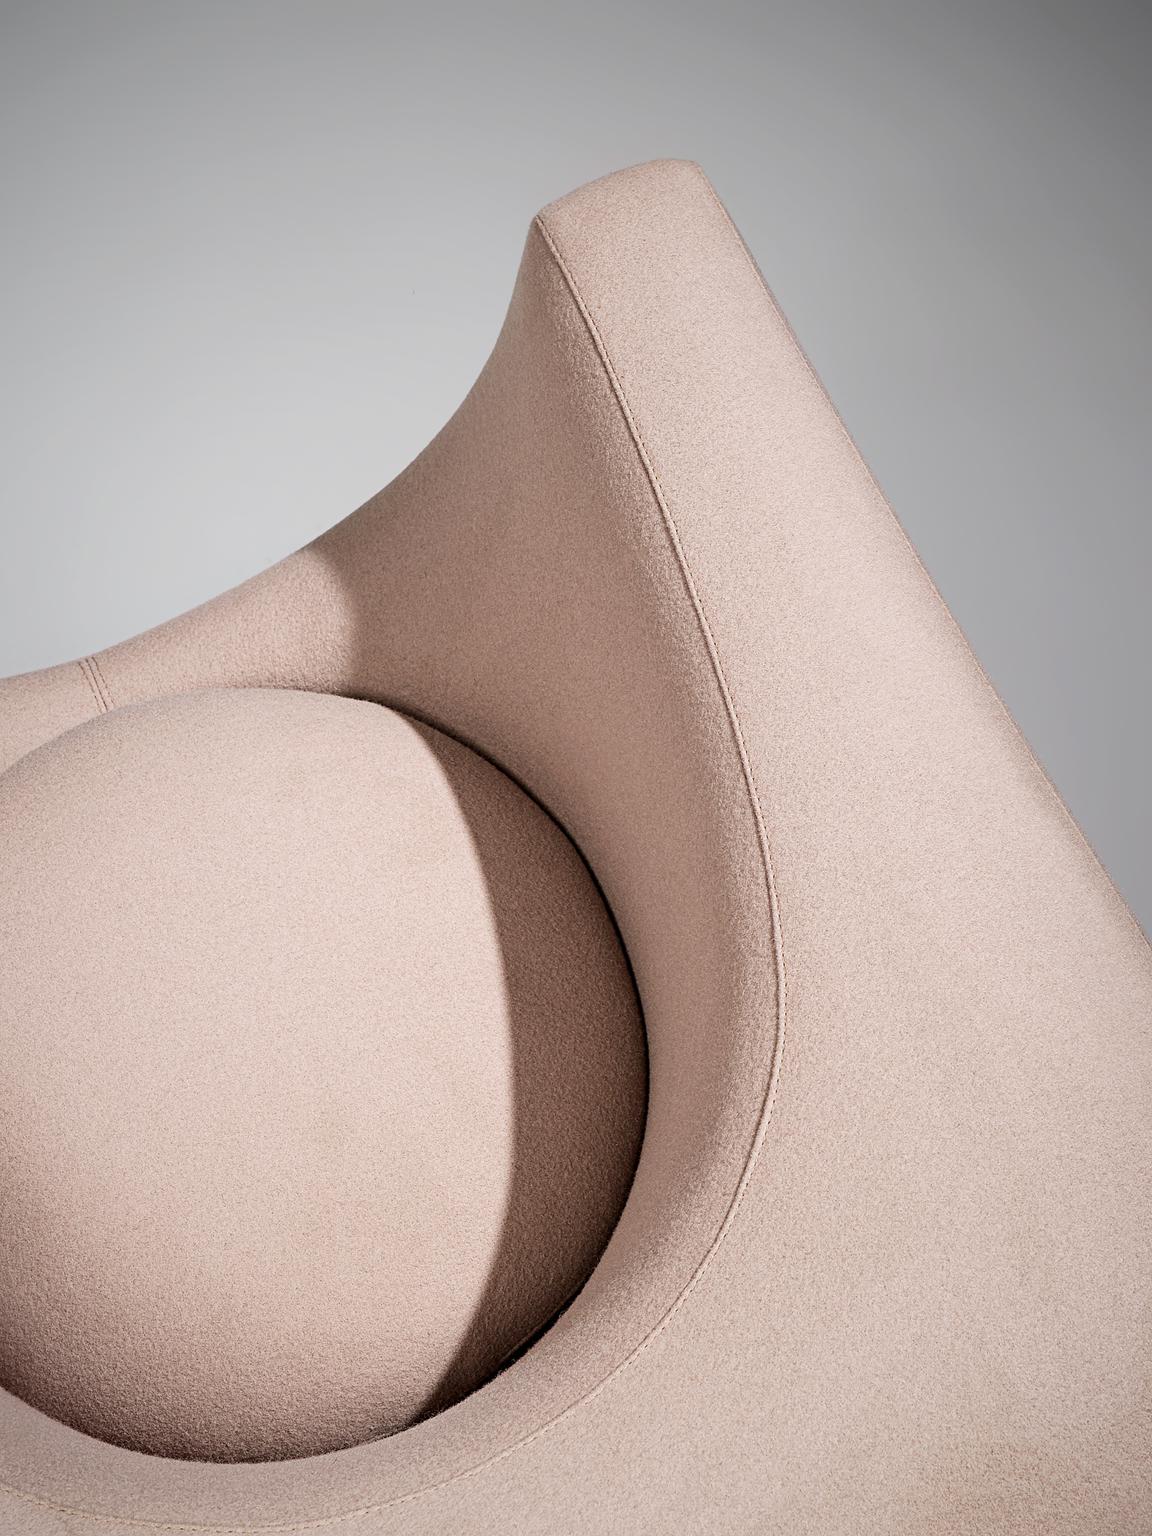 Saporiti Lounge Chairs with Warm Beige Upholstery (Ende des 20. Jahrhunderts)